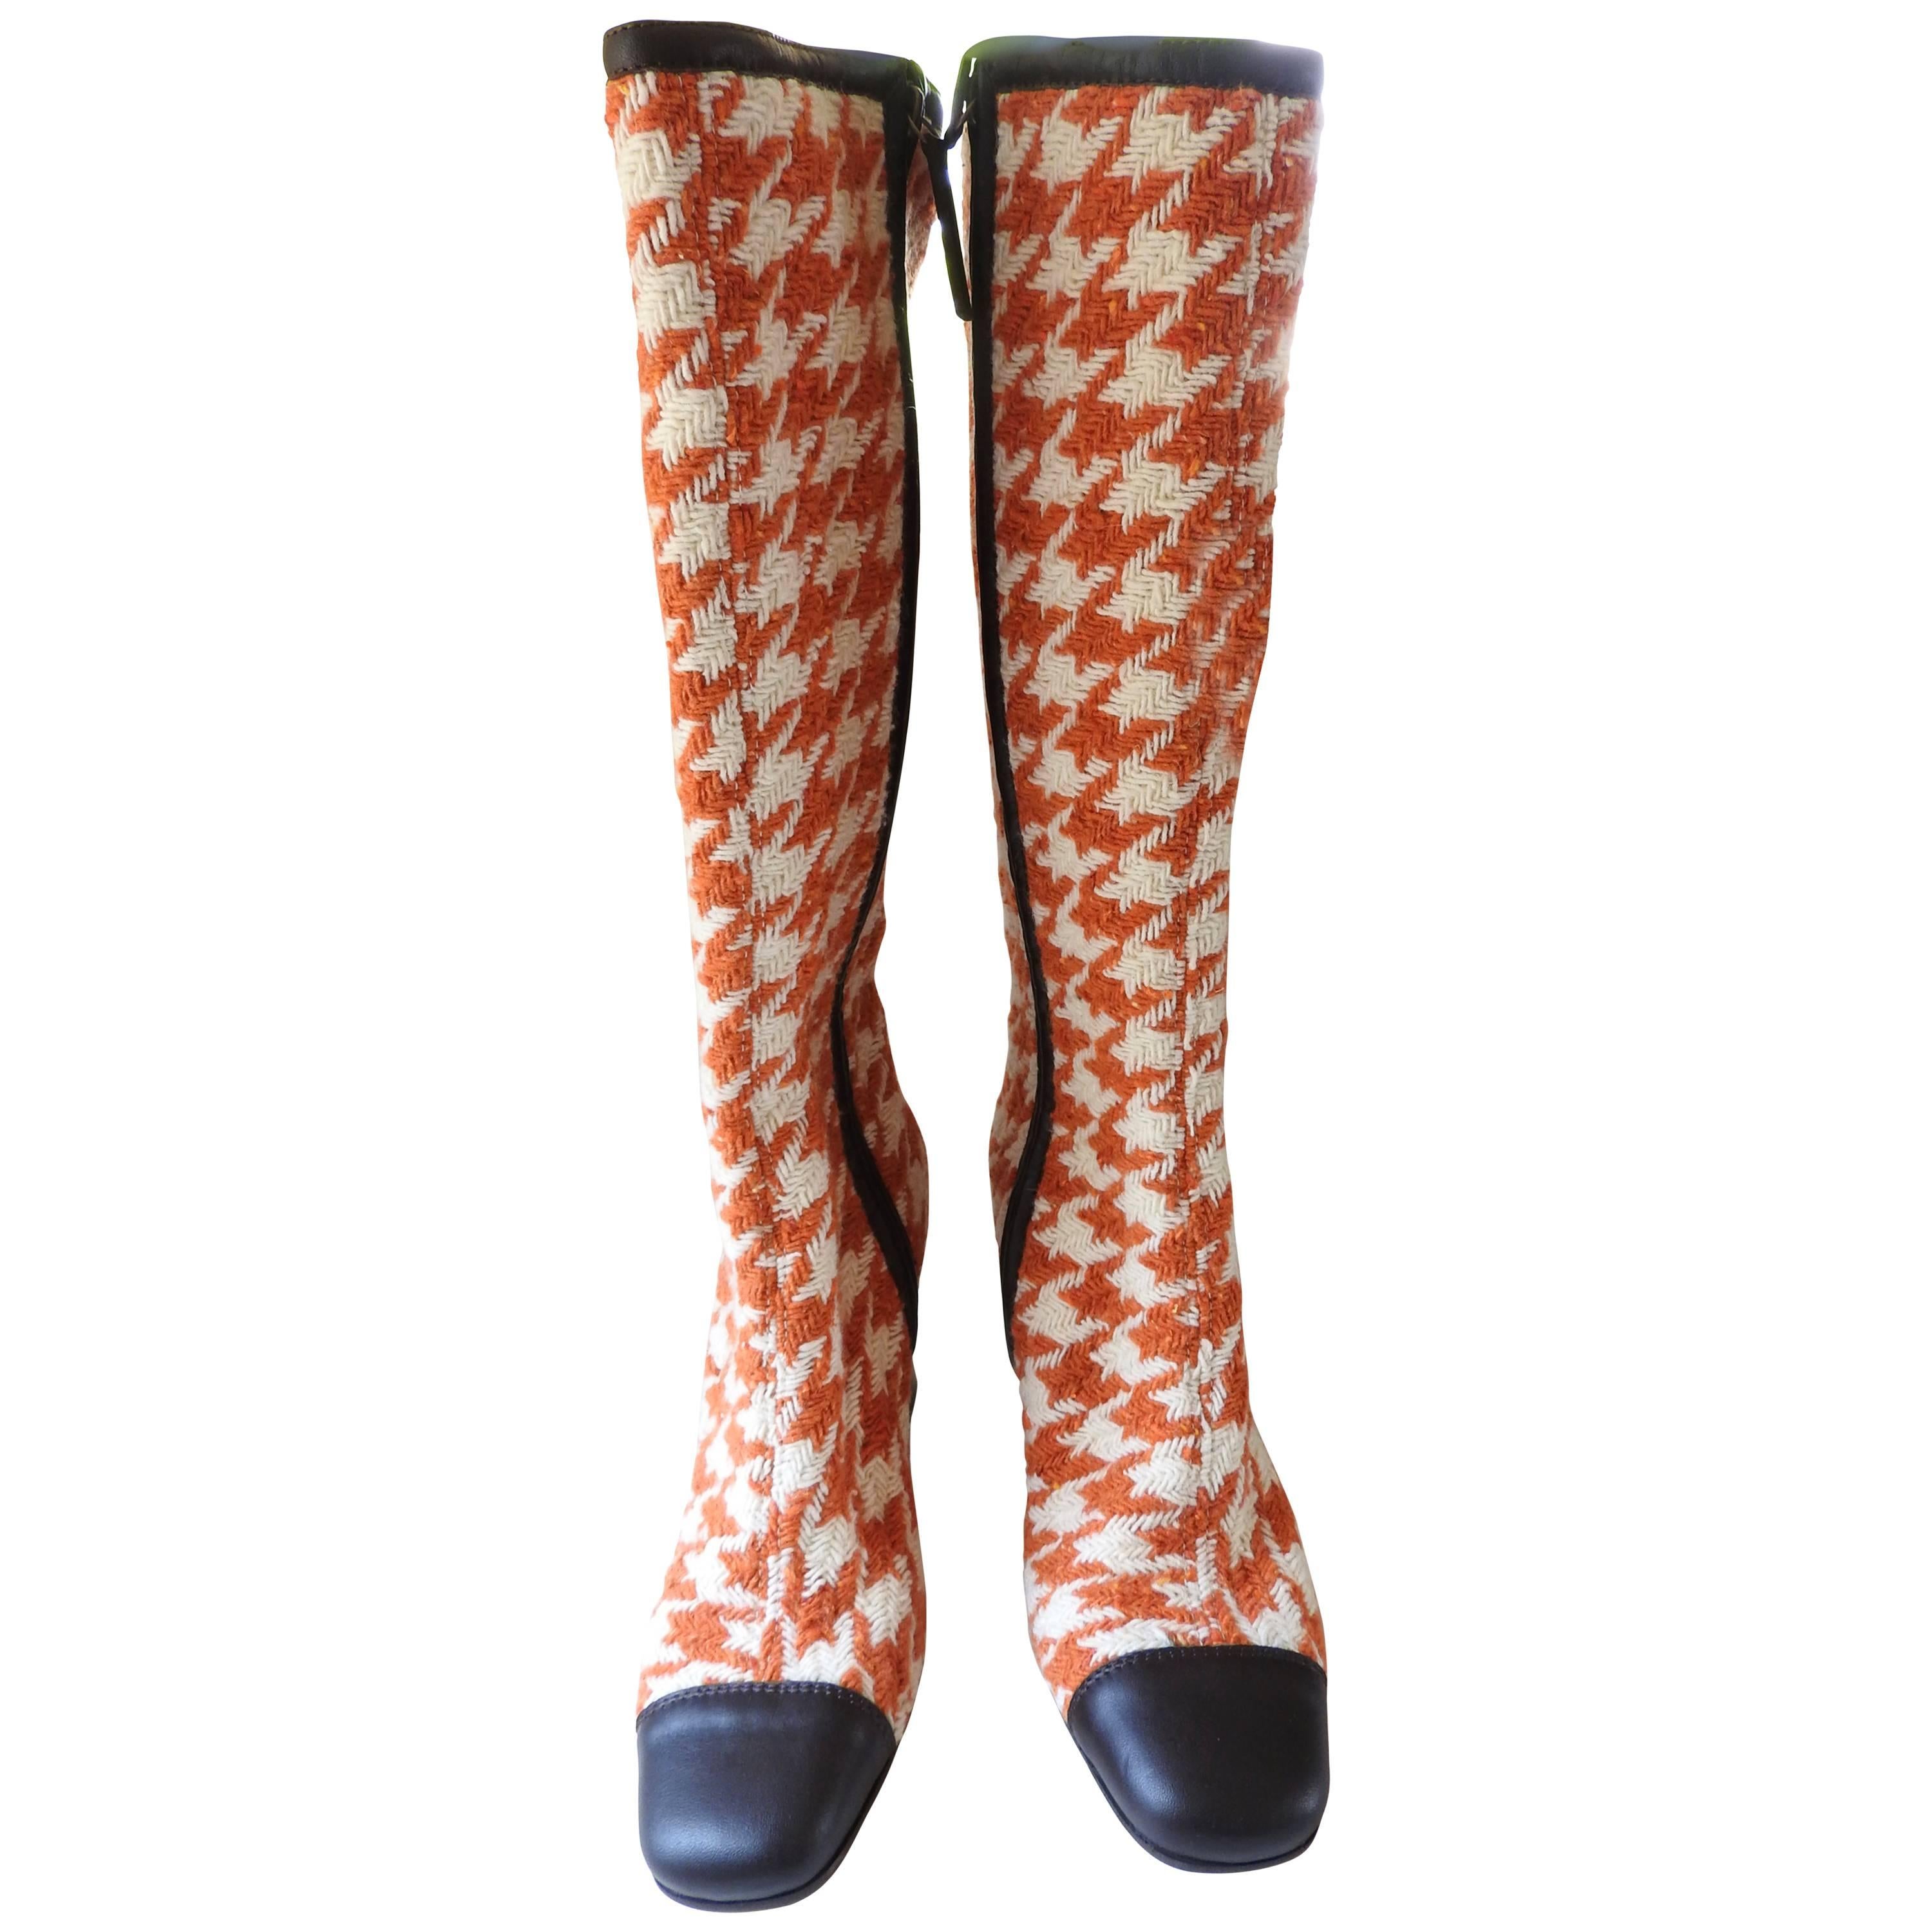 NEW ✿*ﾟTAPEET By VICINI  Lambskin Wool Woven Knee High Dress BOOTS  7.5 , I 8  For Sale